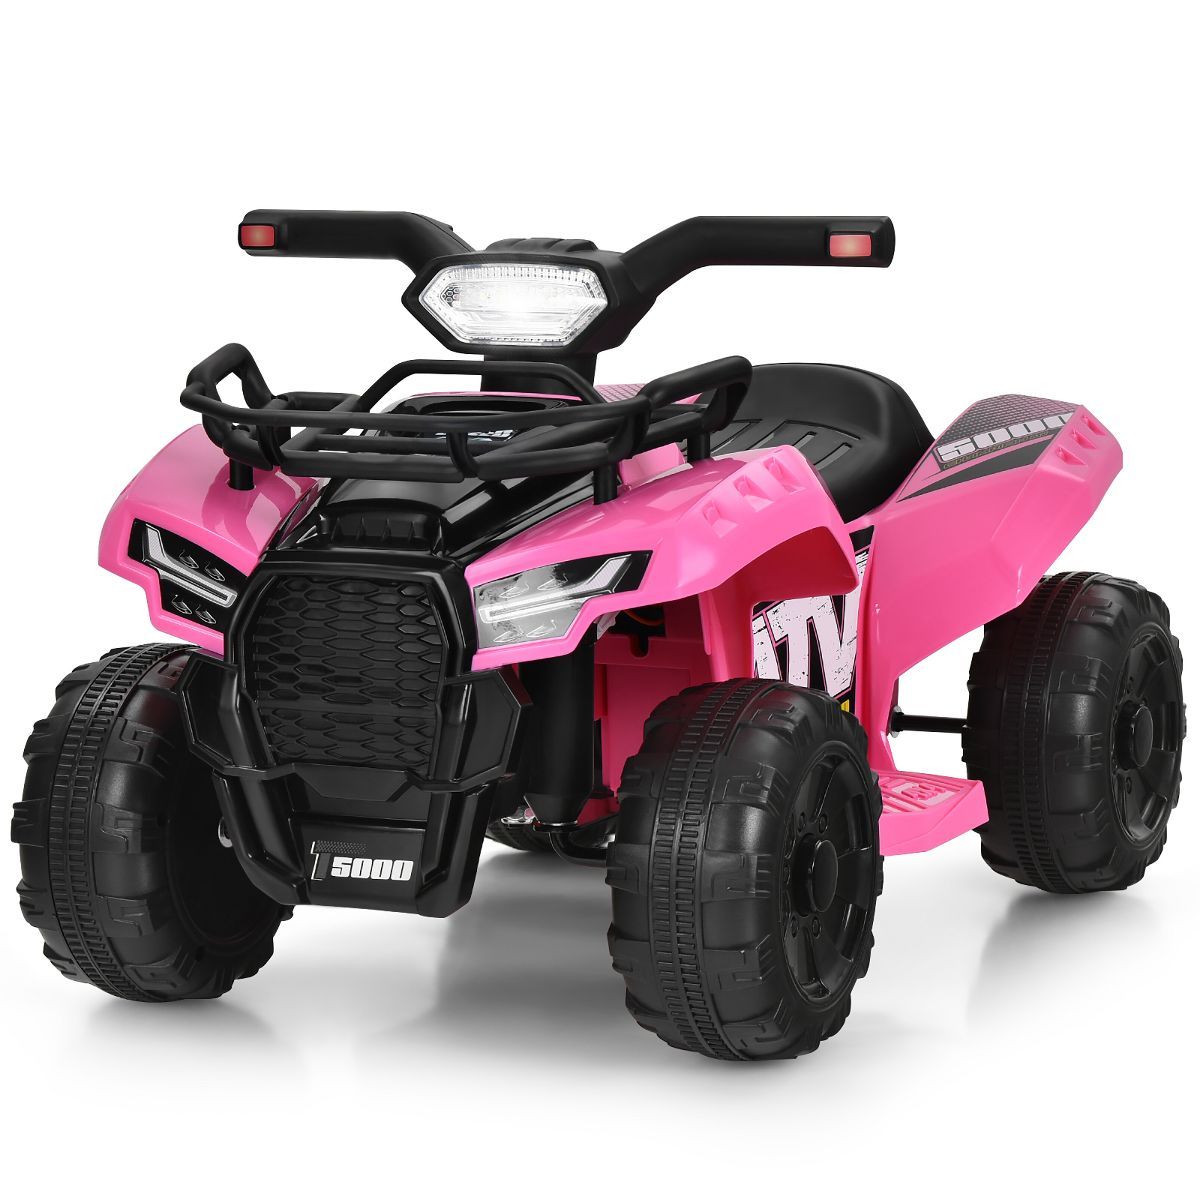 Costway 6V Kids ATV Quad Electric Ride On Car Toy Toddler with LED Light MP3 | Target